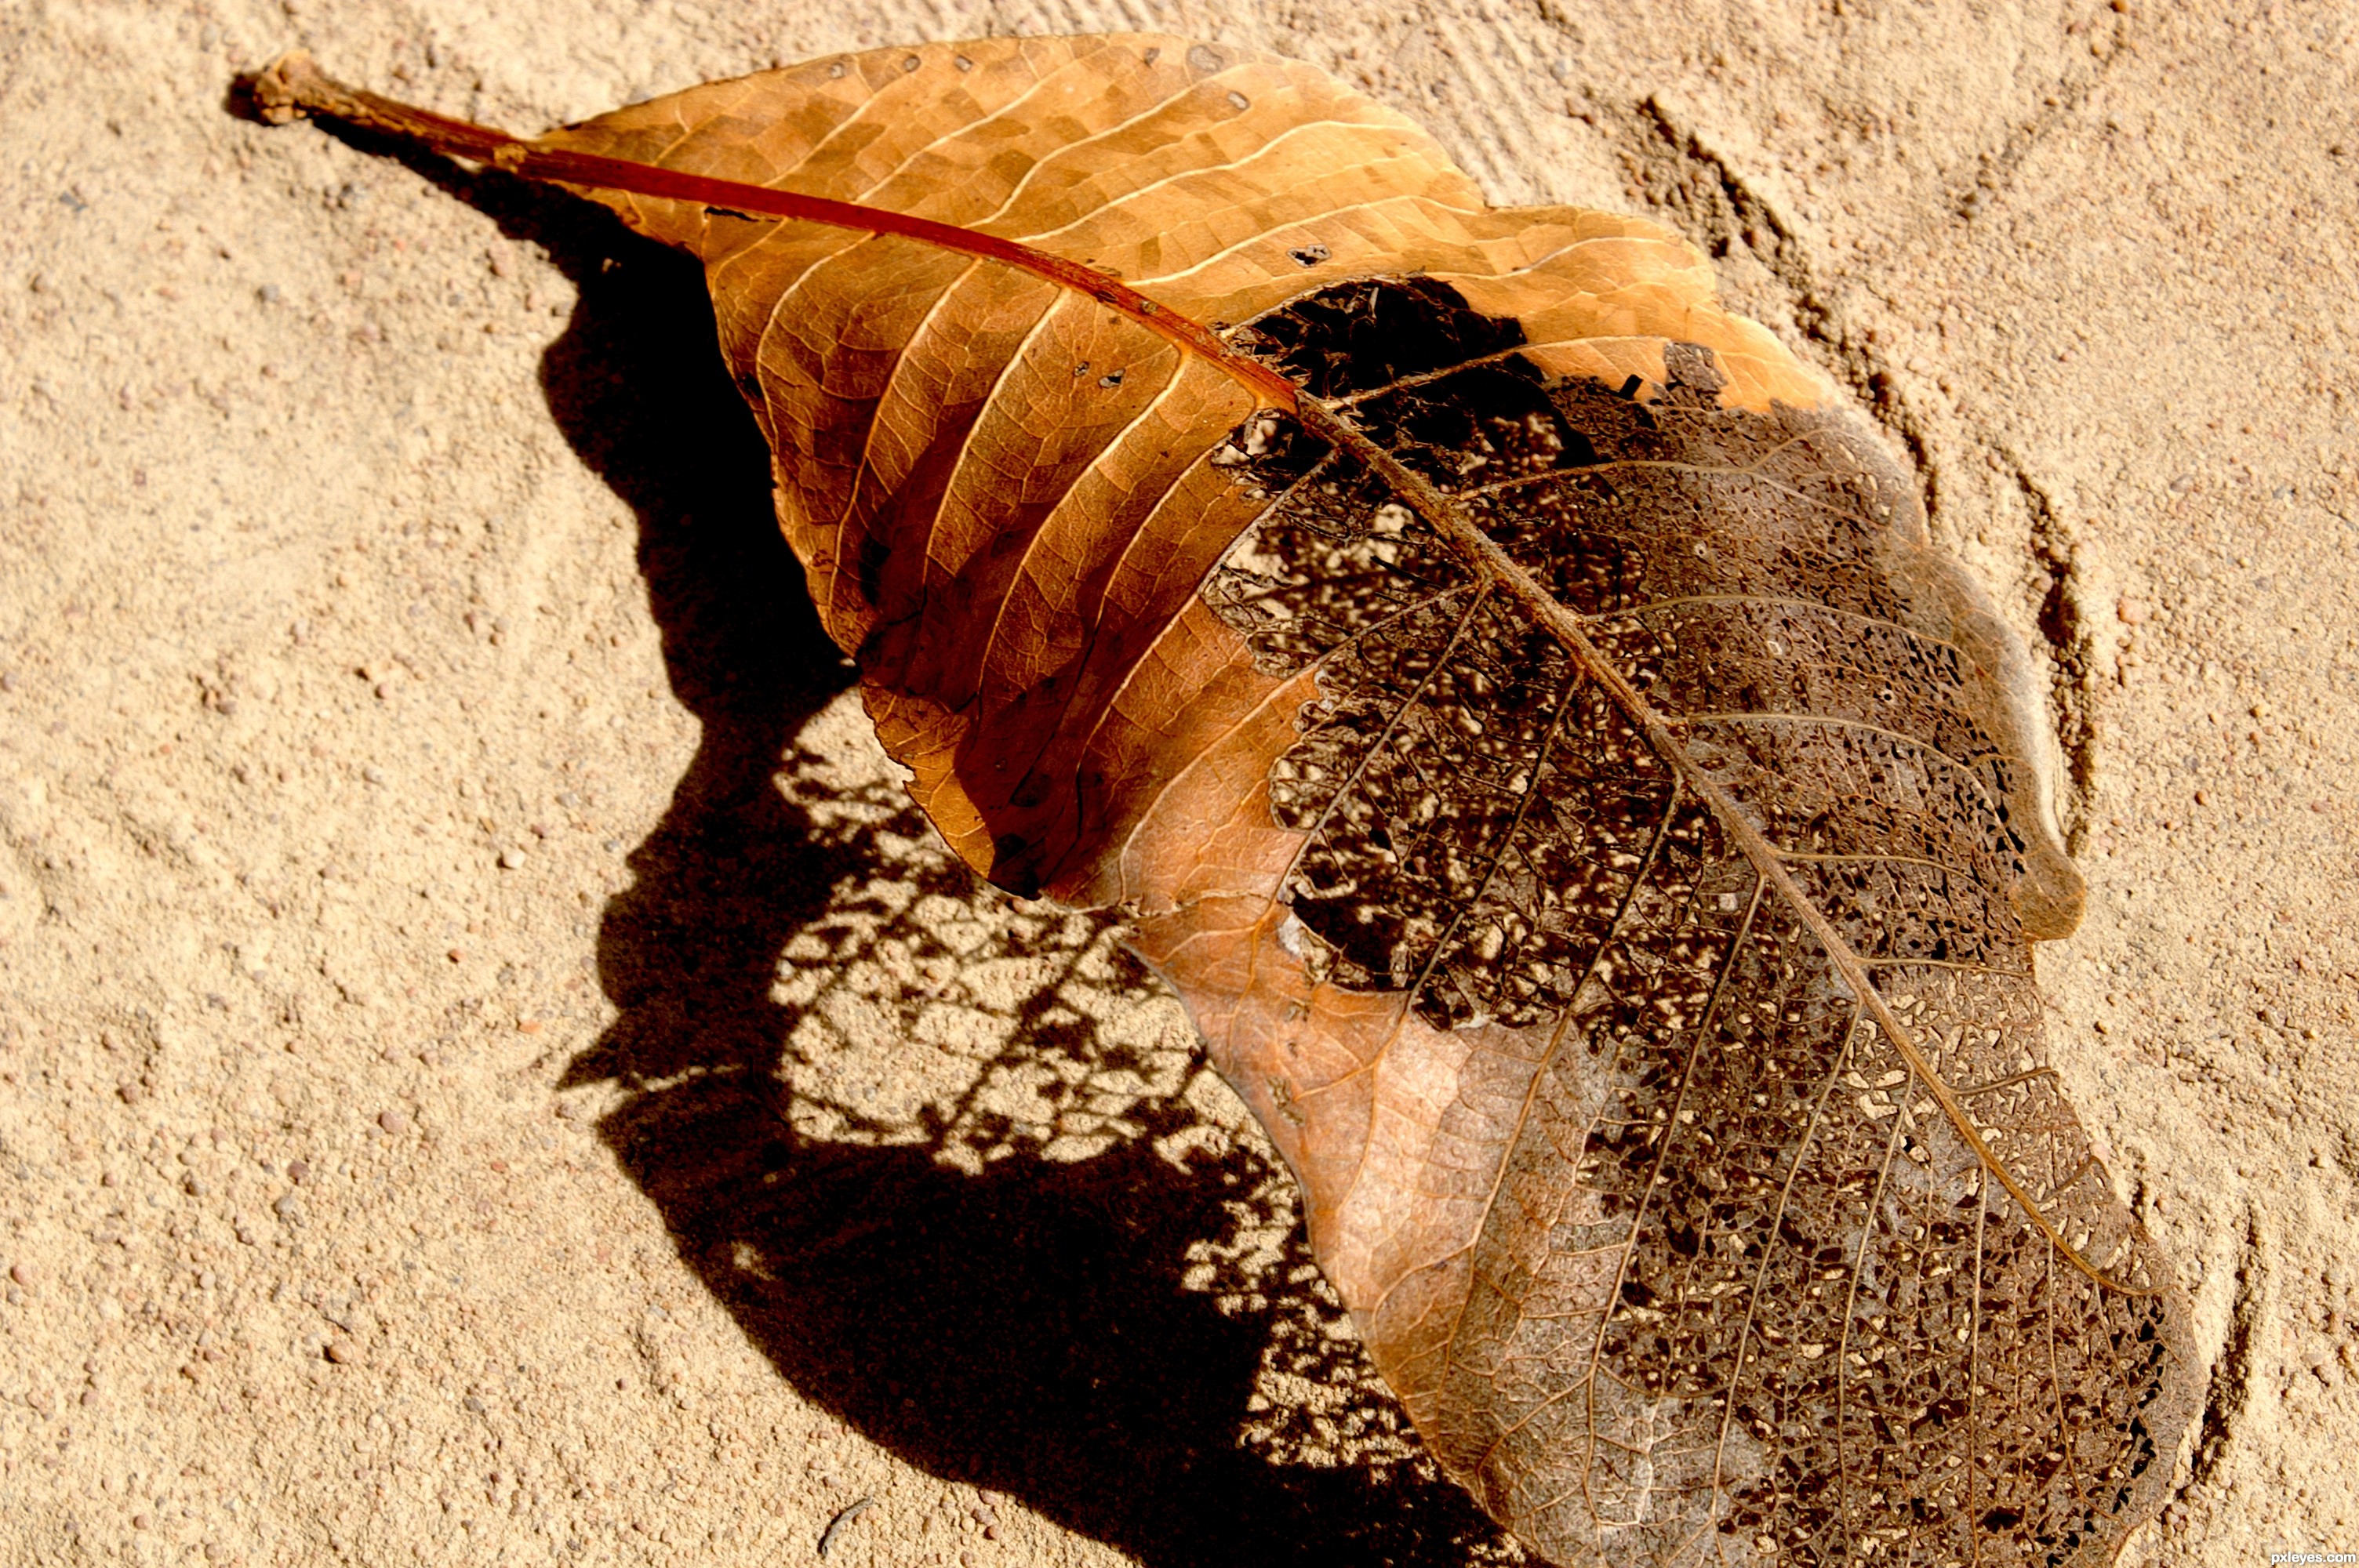 Dead leaf picture, by deringer for: single leaf photography contest ...